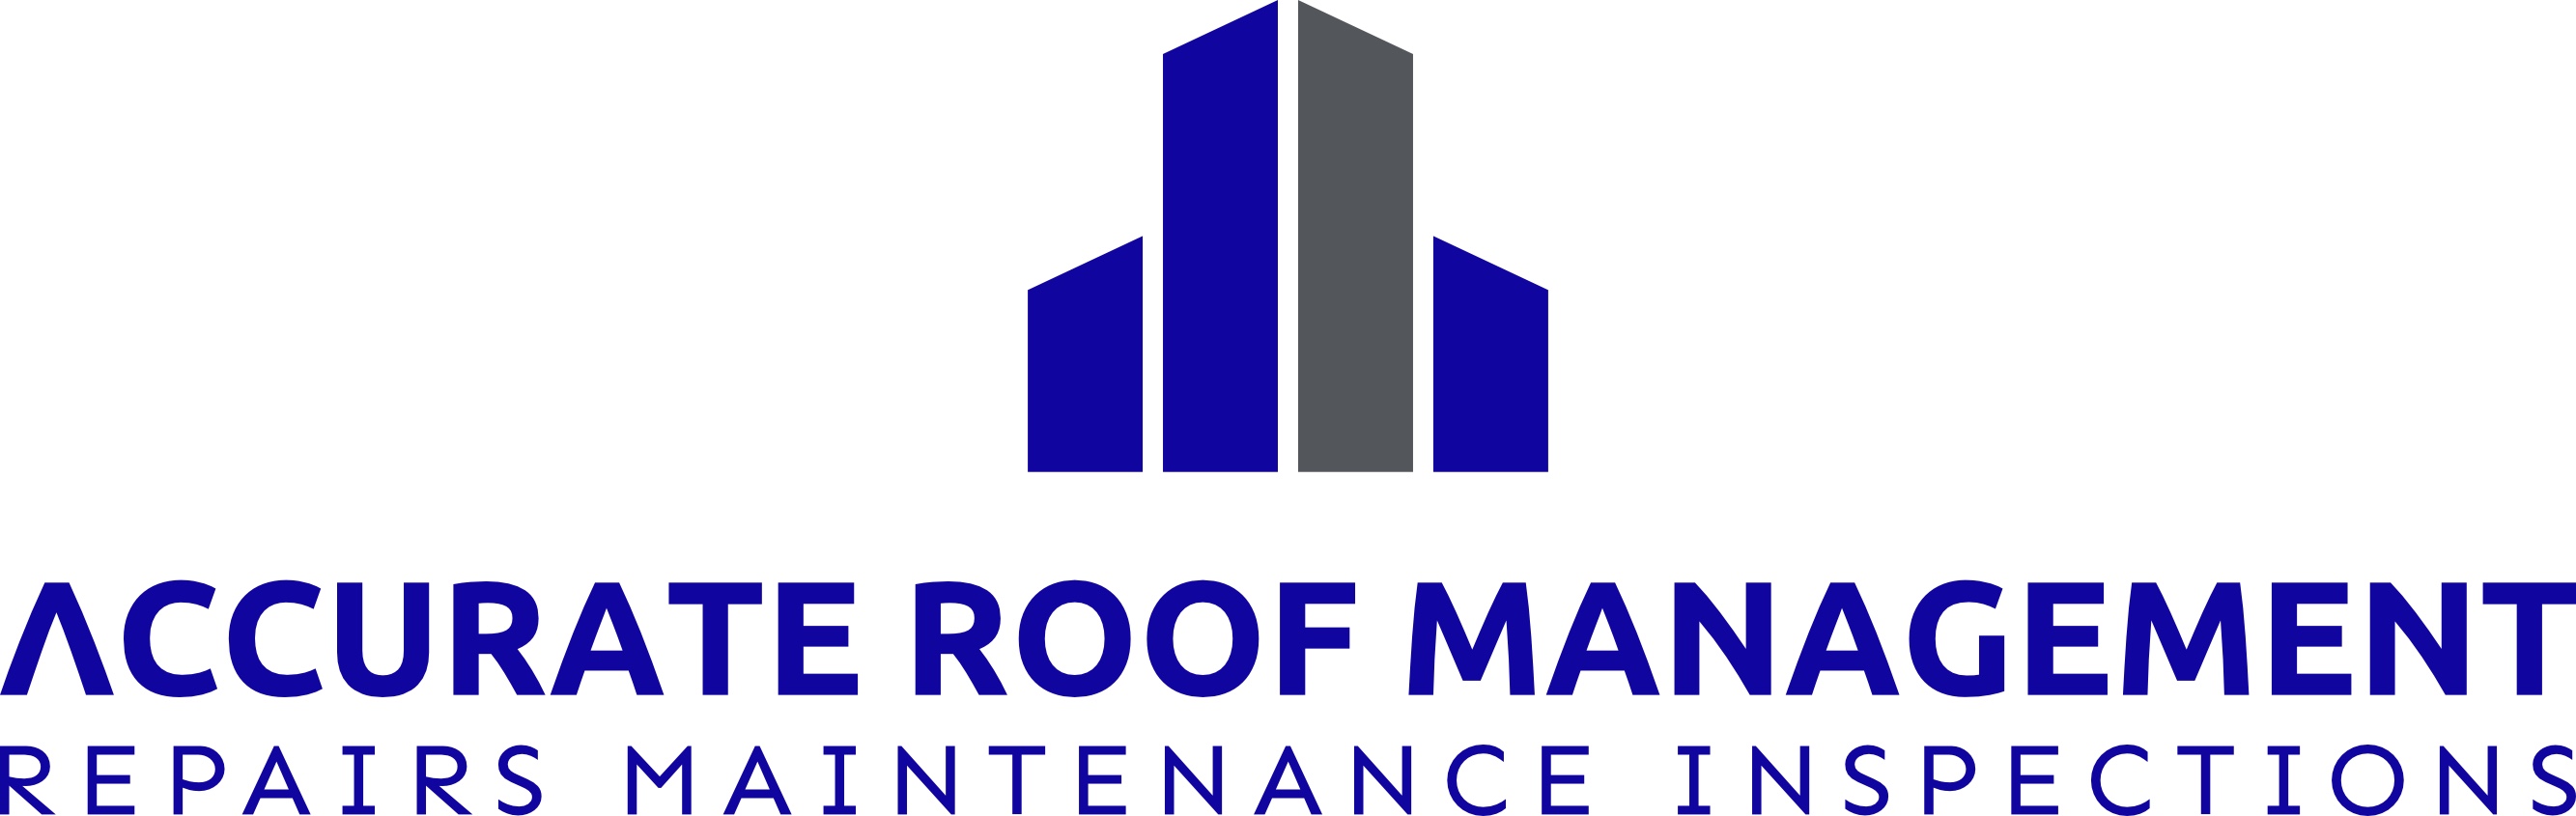 Accurate Roof Management, LLC Logo